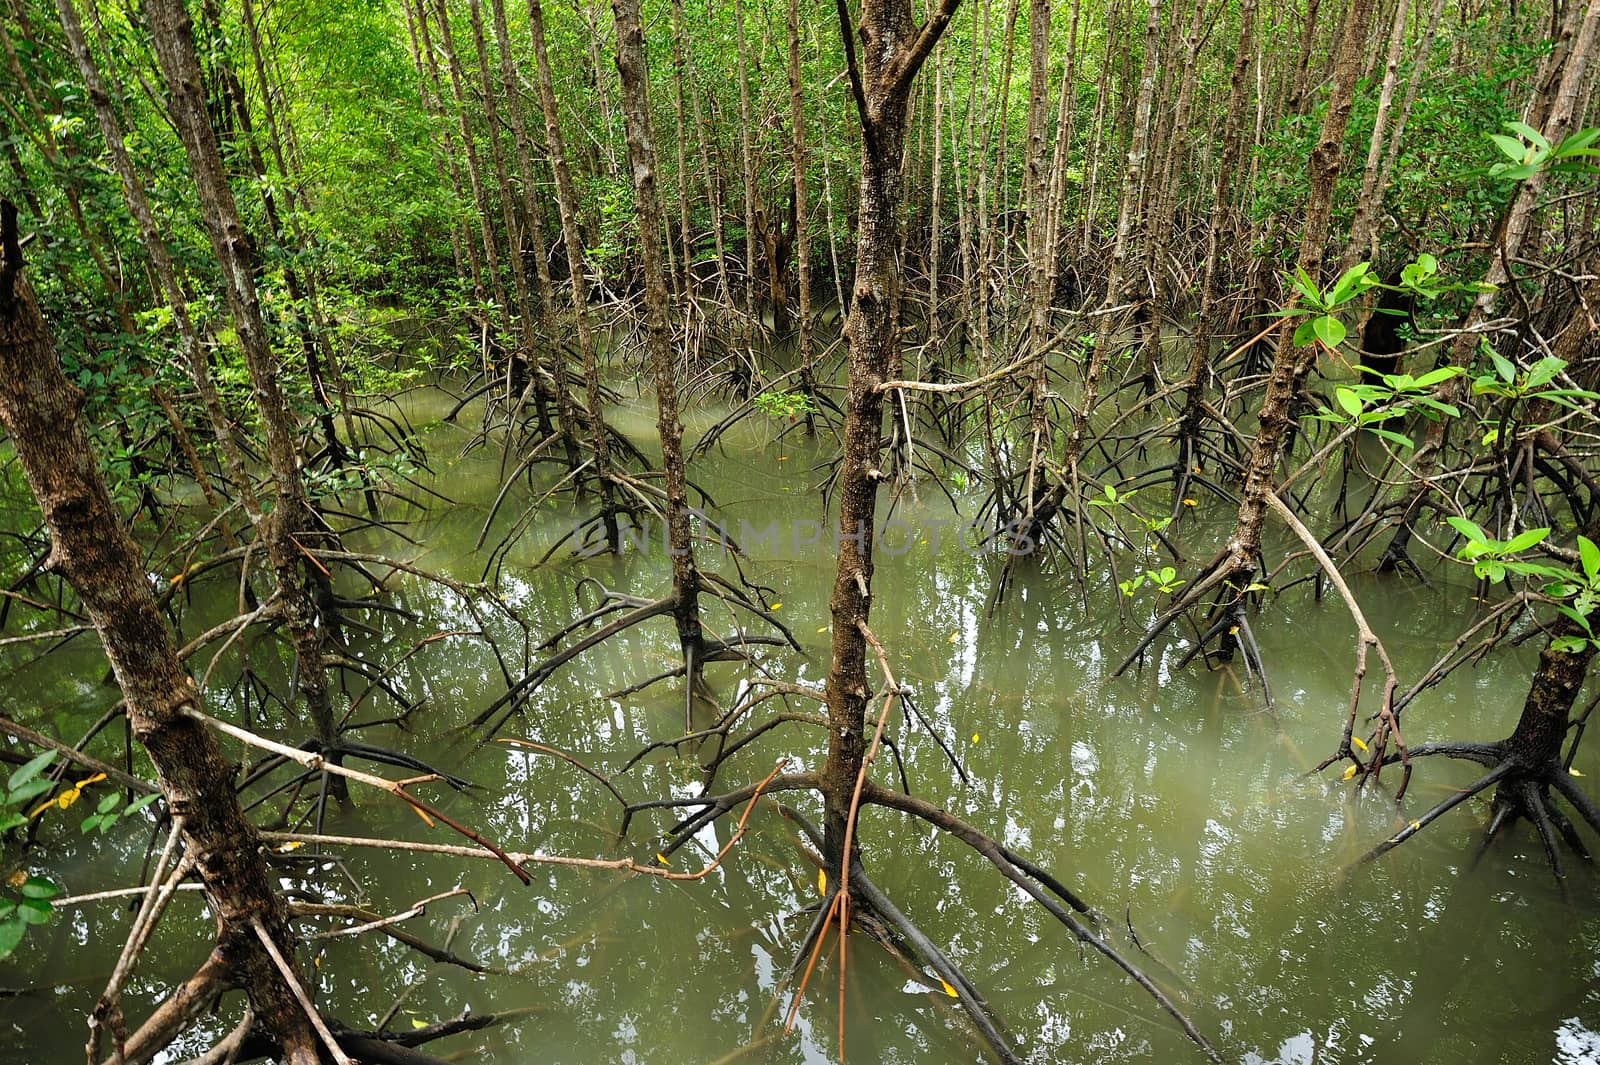 The forest mangrove at Songkra, Thailand.